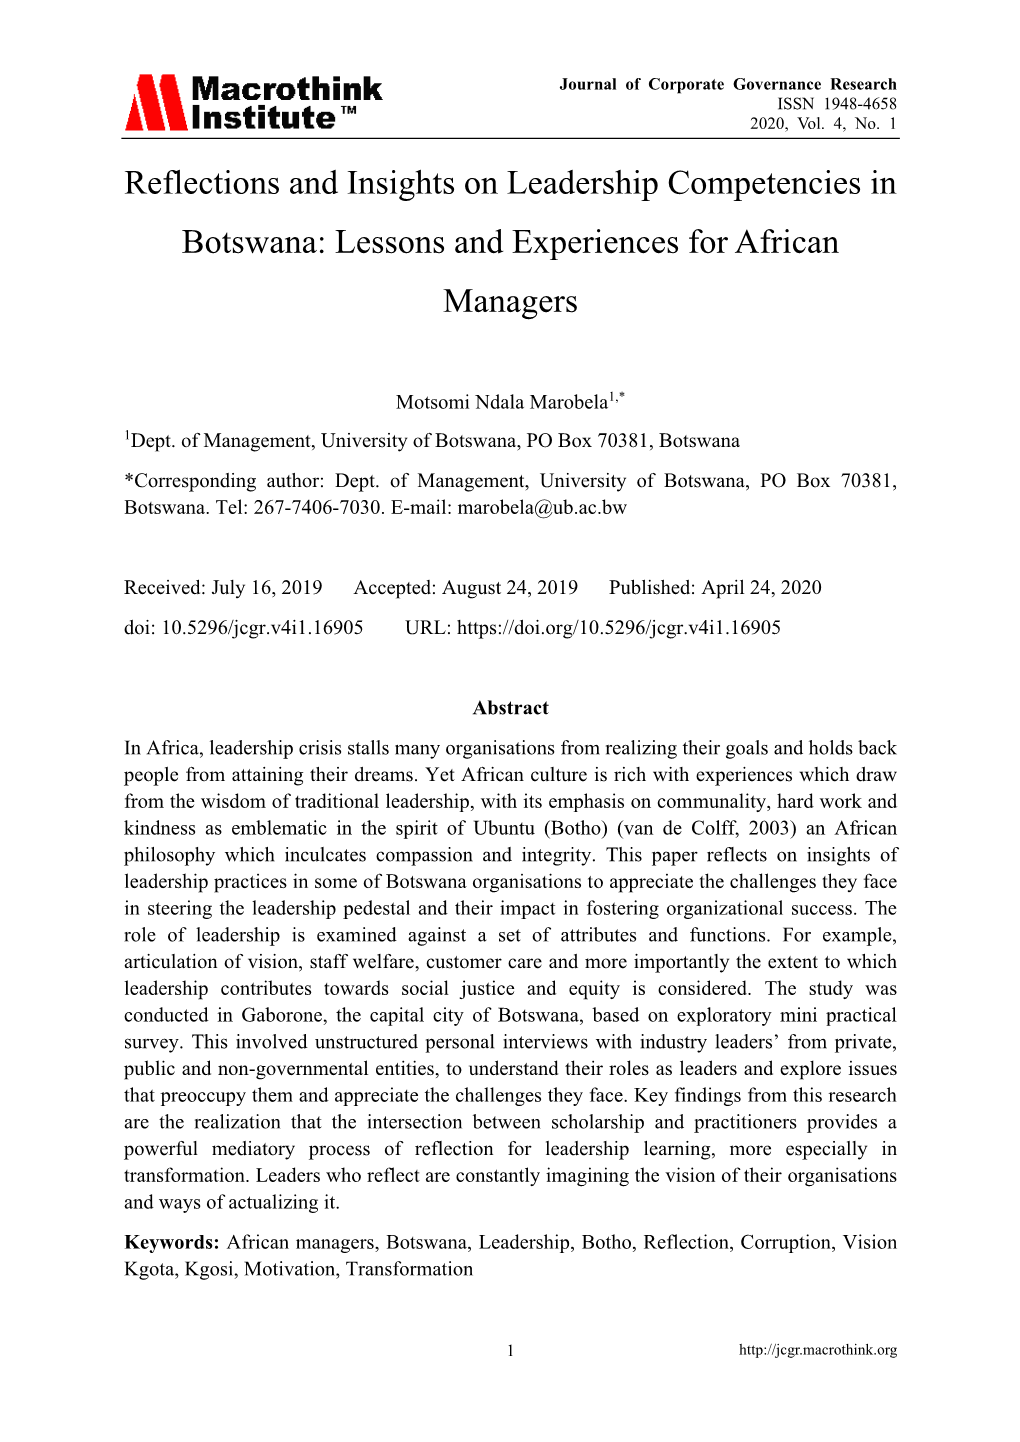 Reflections and Insights on Leadership Competencies in Botswana: Lessons and Experiences for African Managers